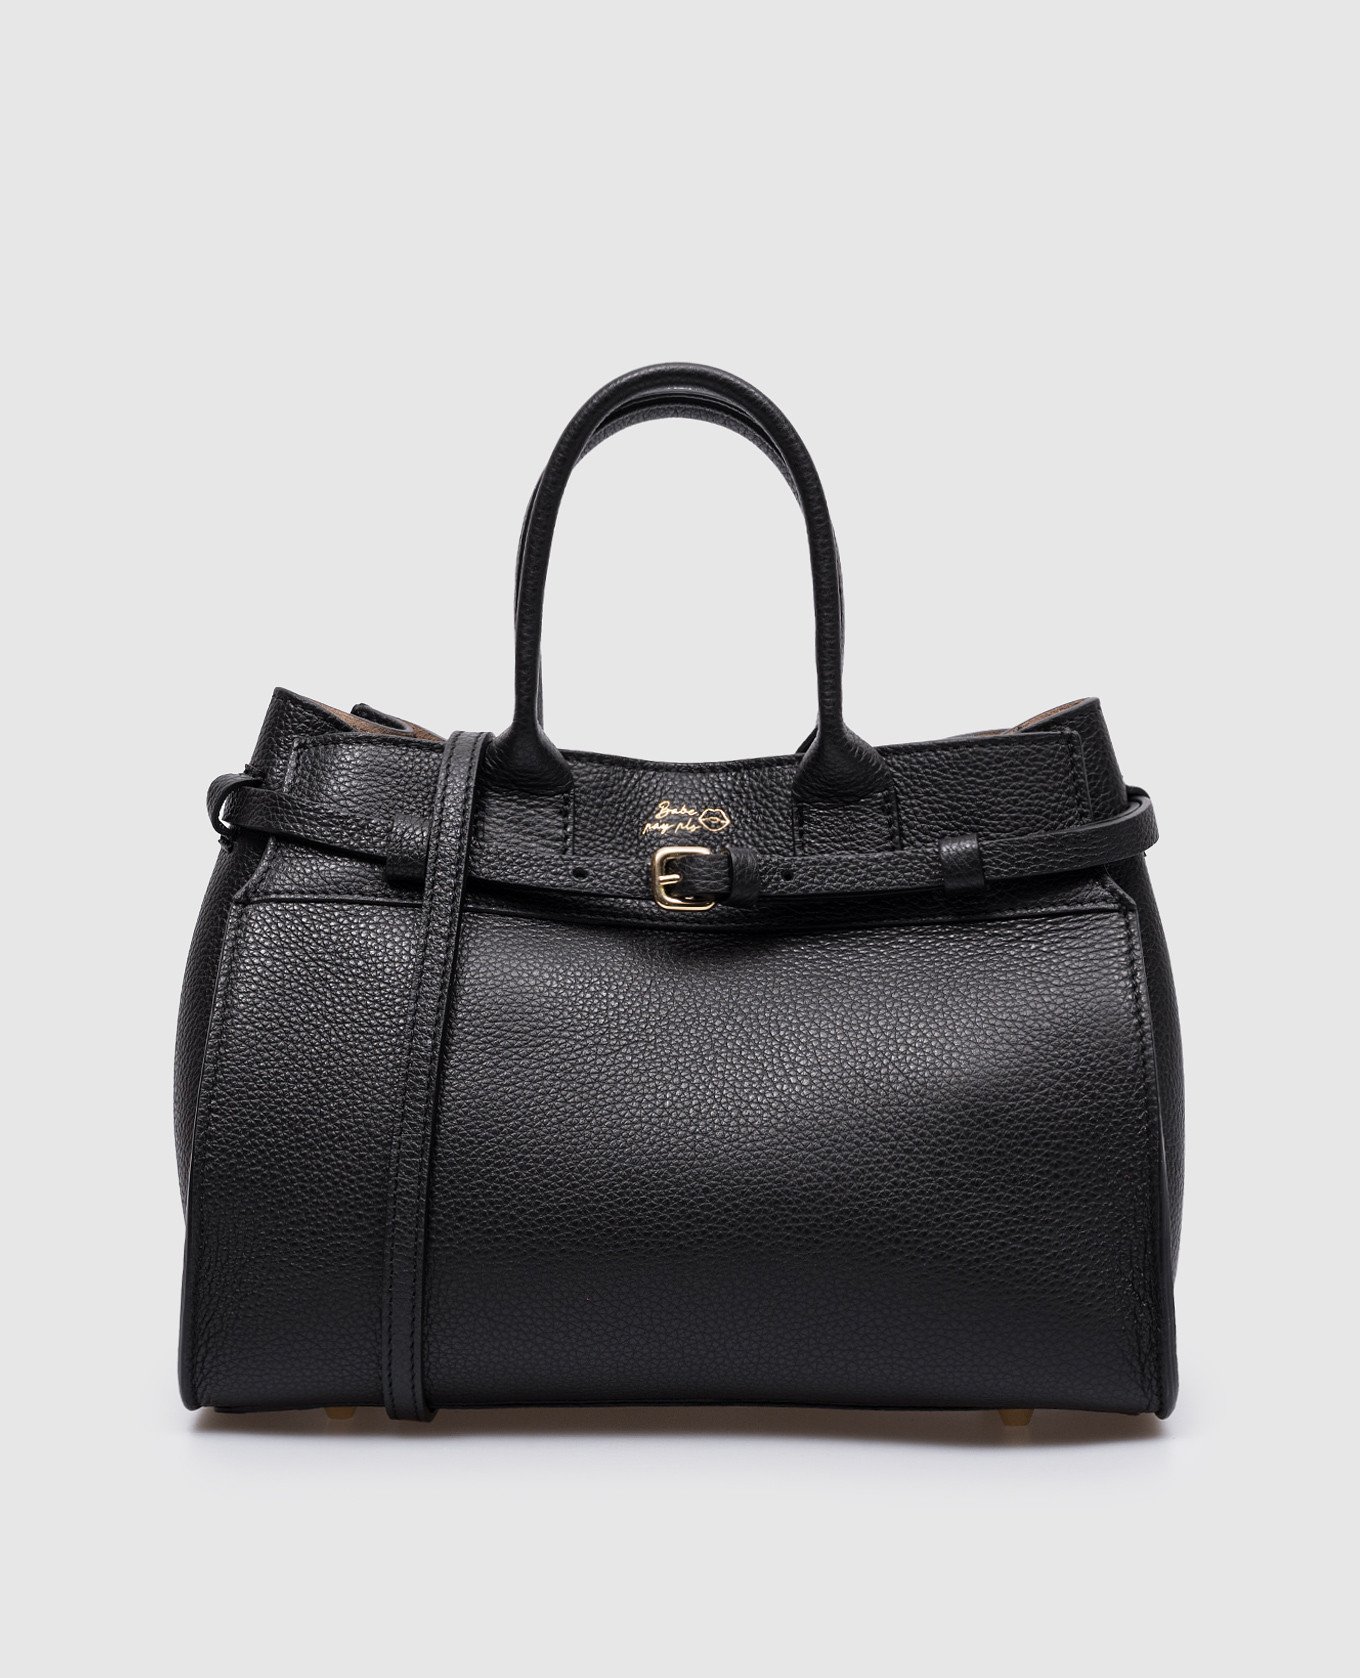 Black leather tote bag with logo